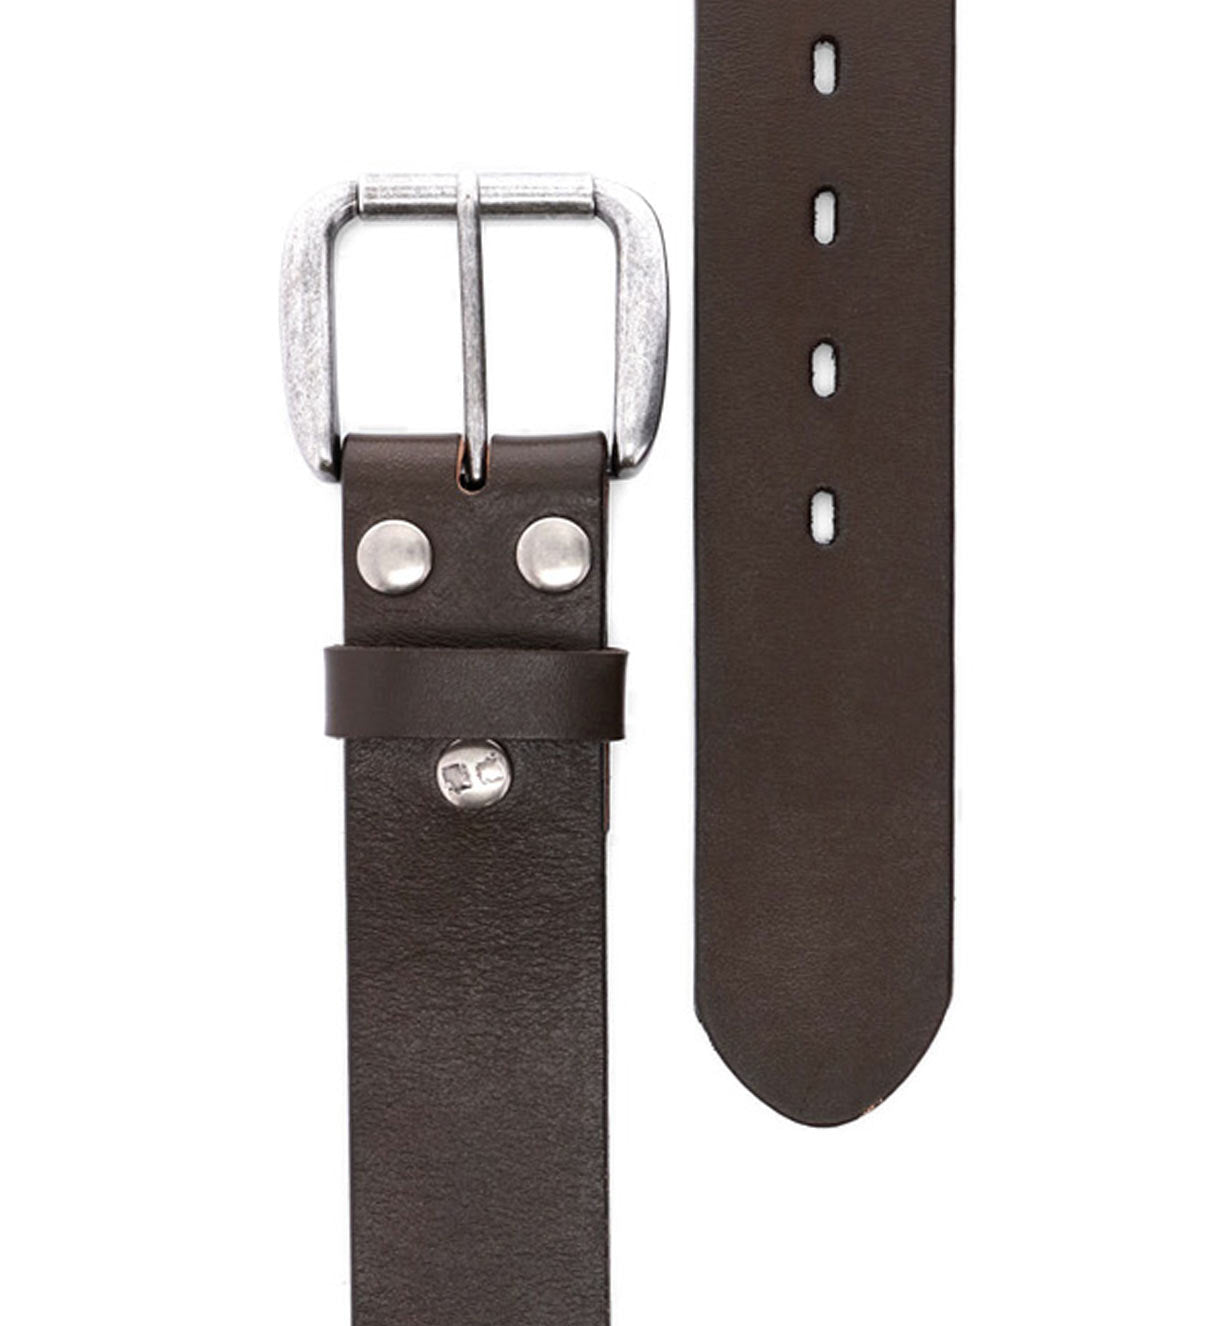 A brown leather Hobo belt with two metal buckles by Bed Stu.